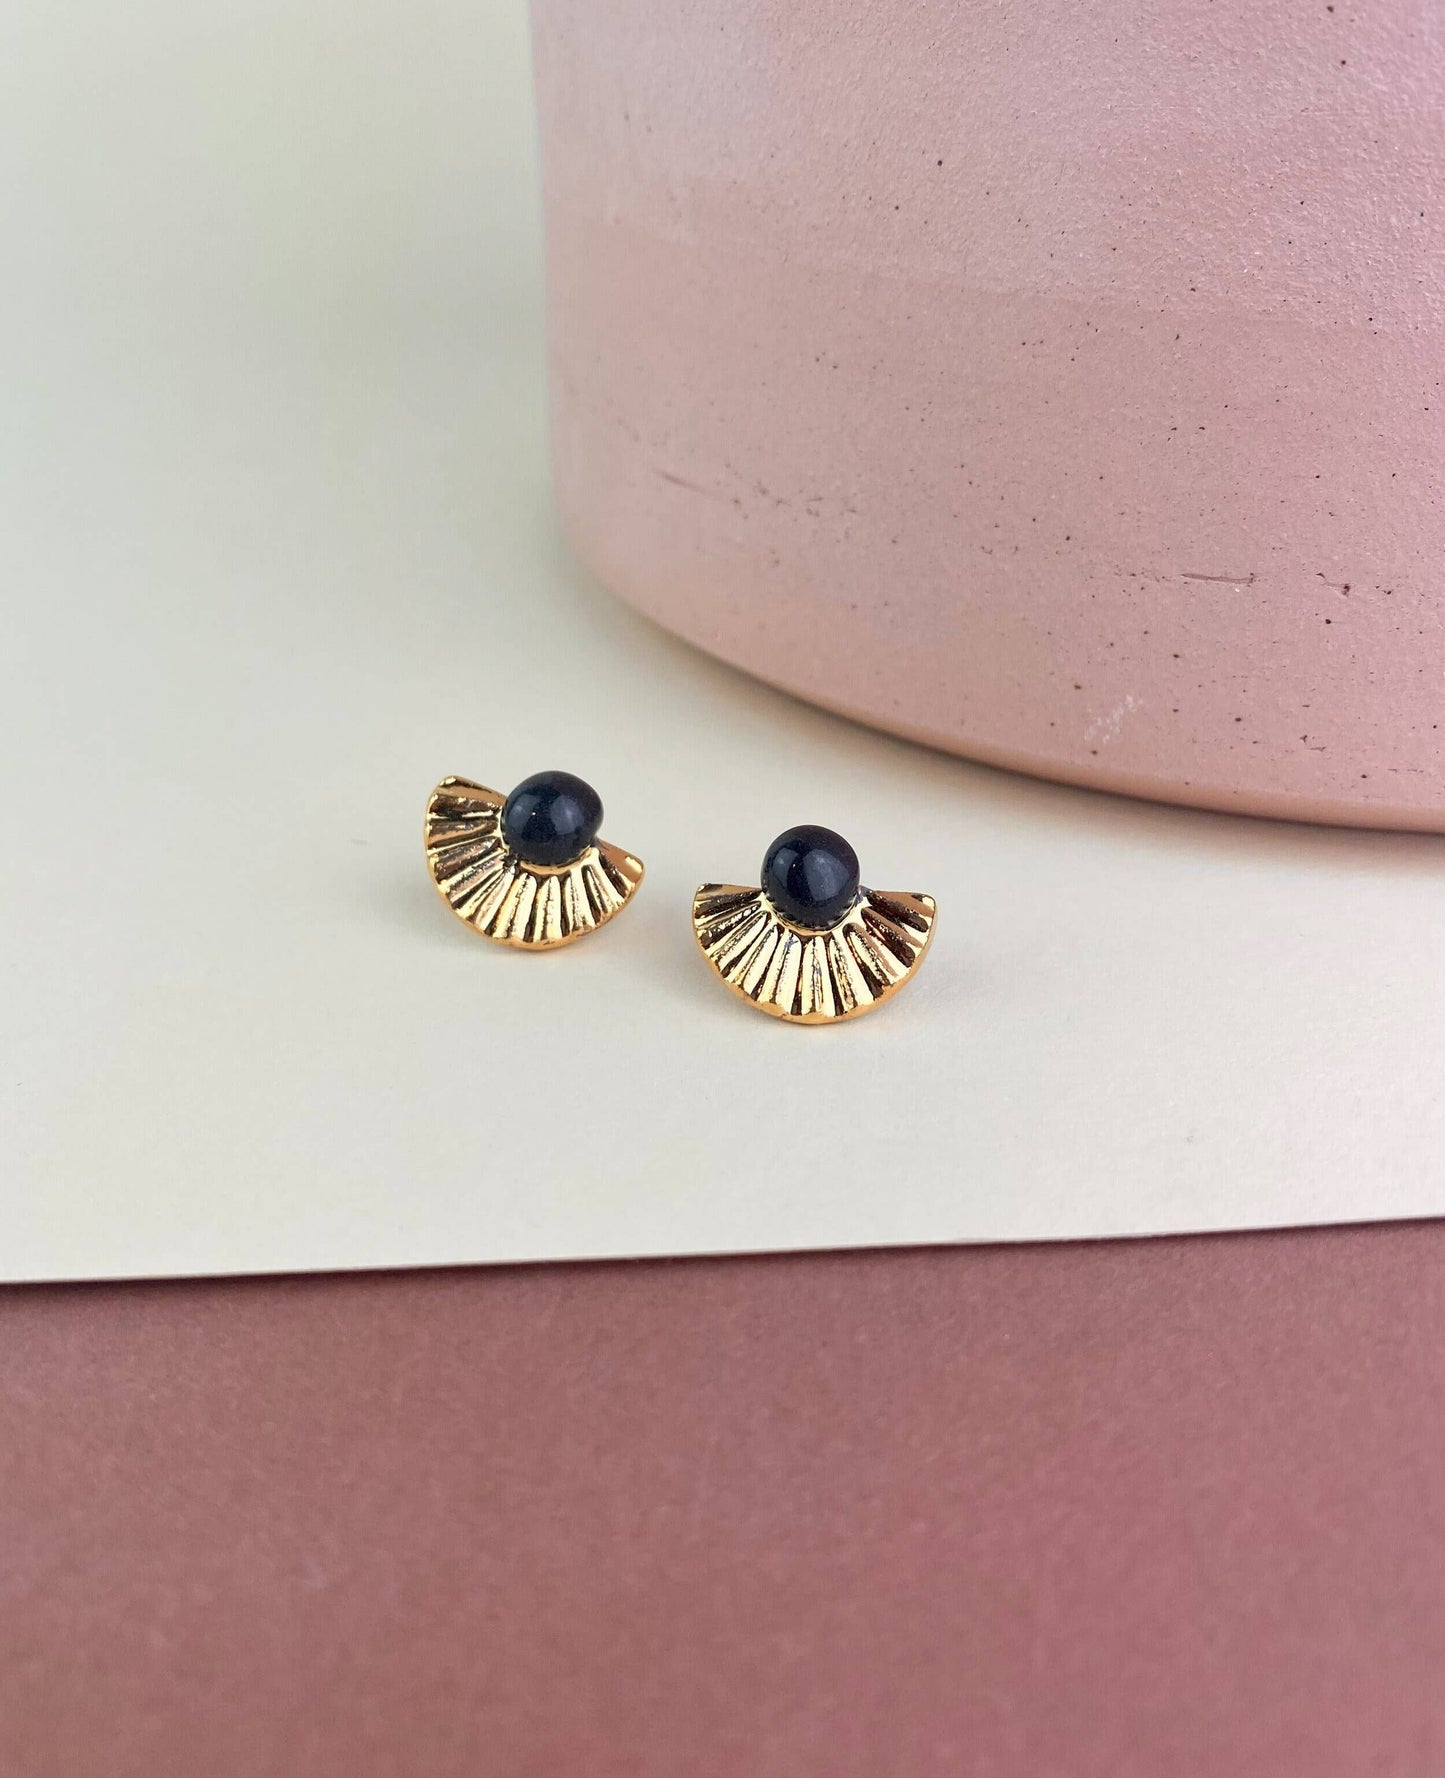 Barrow PDX Gold Fan Studs - Black Porcelain with Gold Overlay